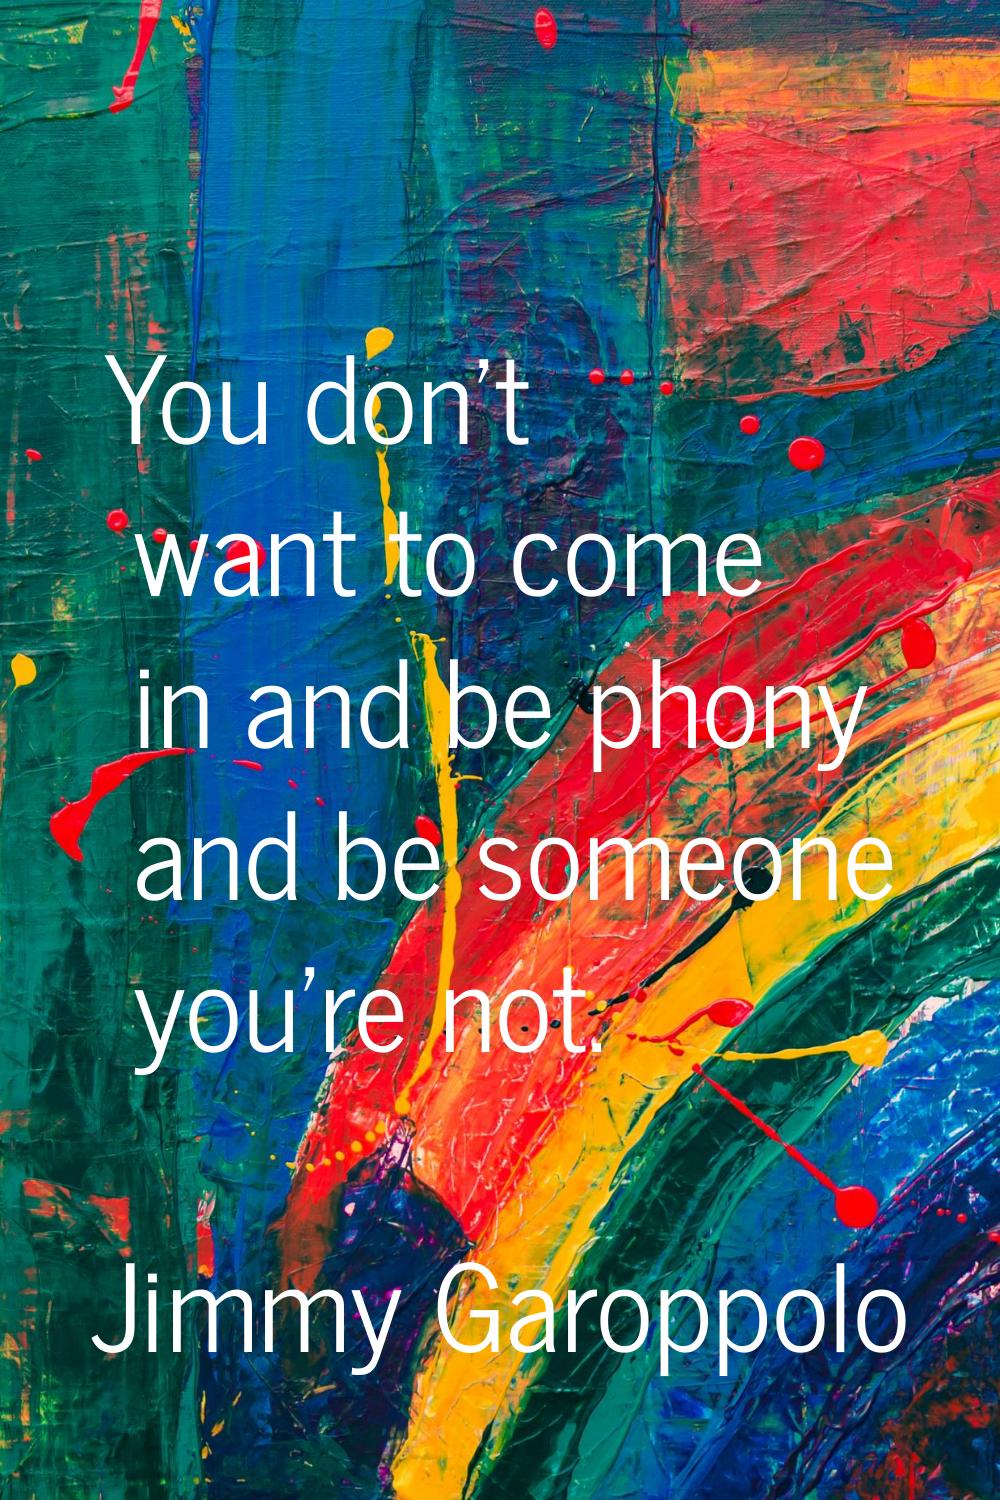 You don't want to come in and be phony and be someone you're not.